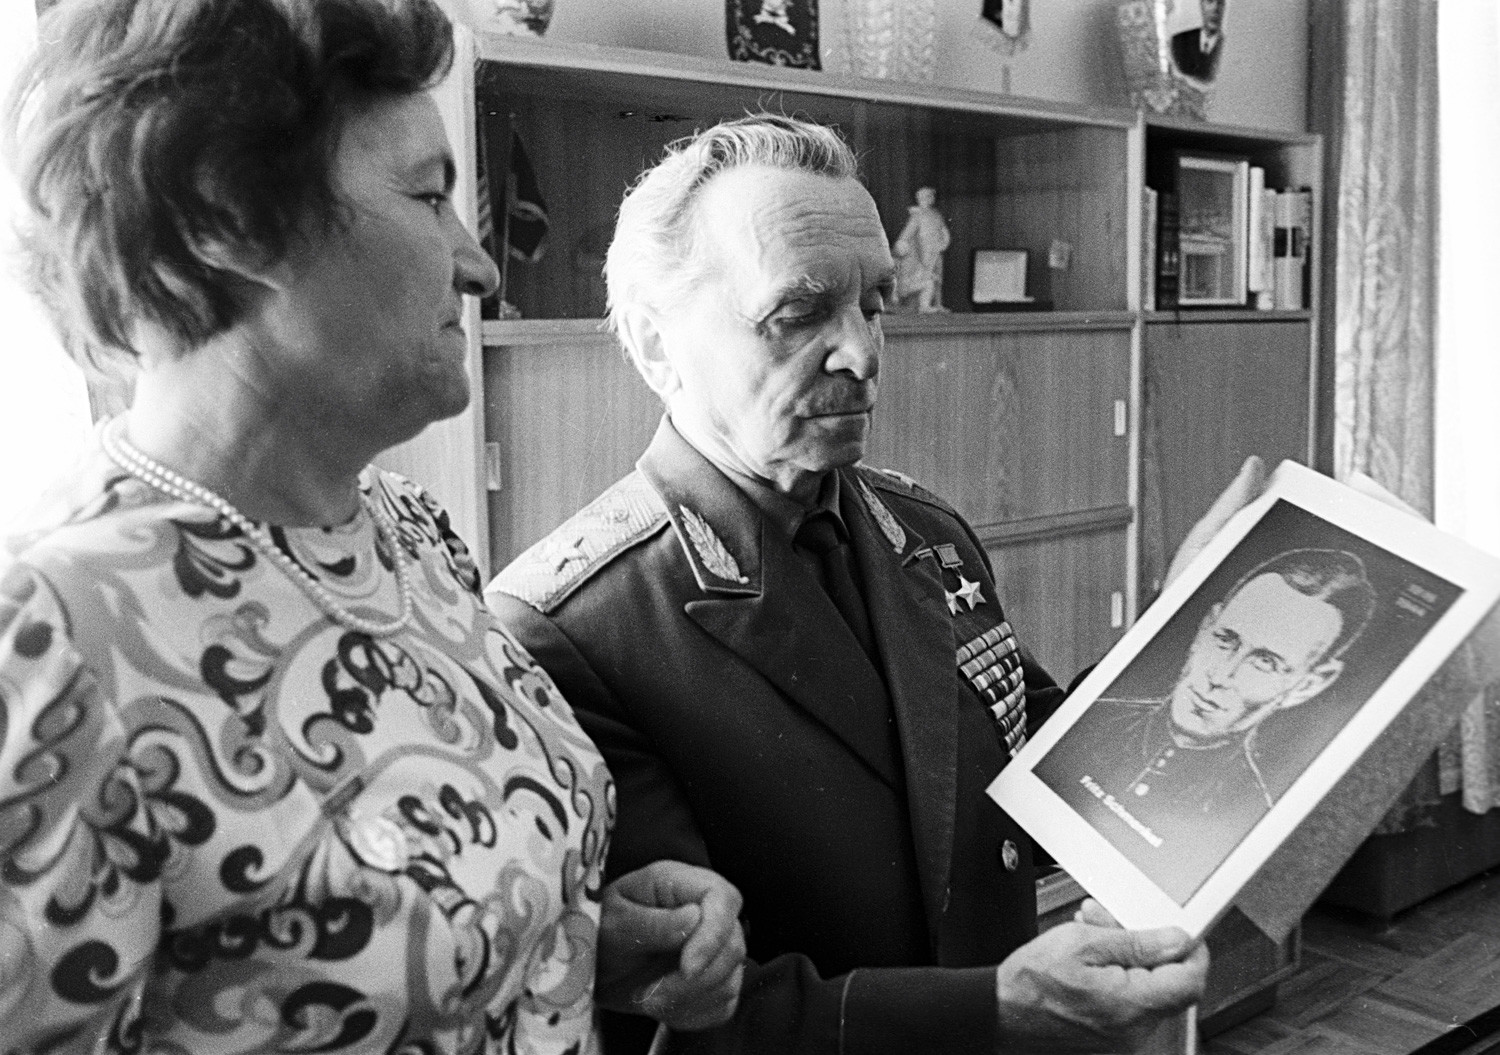 Erna Schmenkel giving General Pyotr Batov an engraving with the image of her husband.